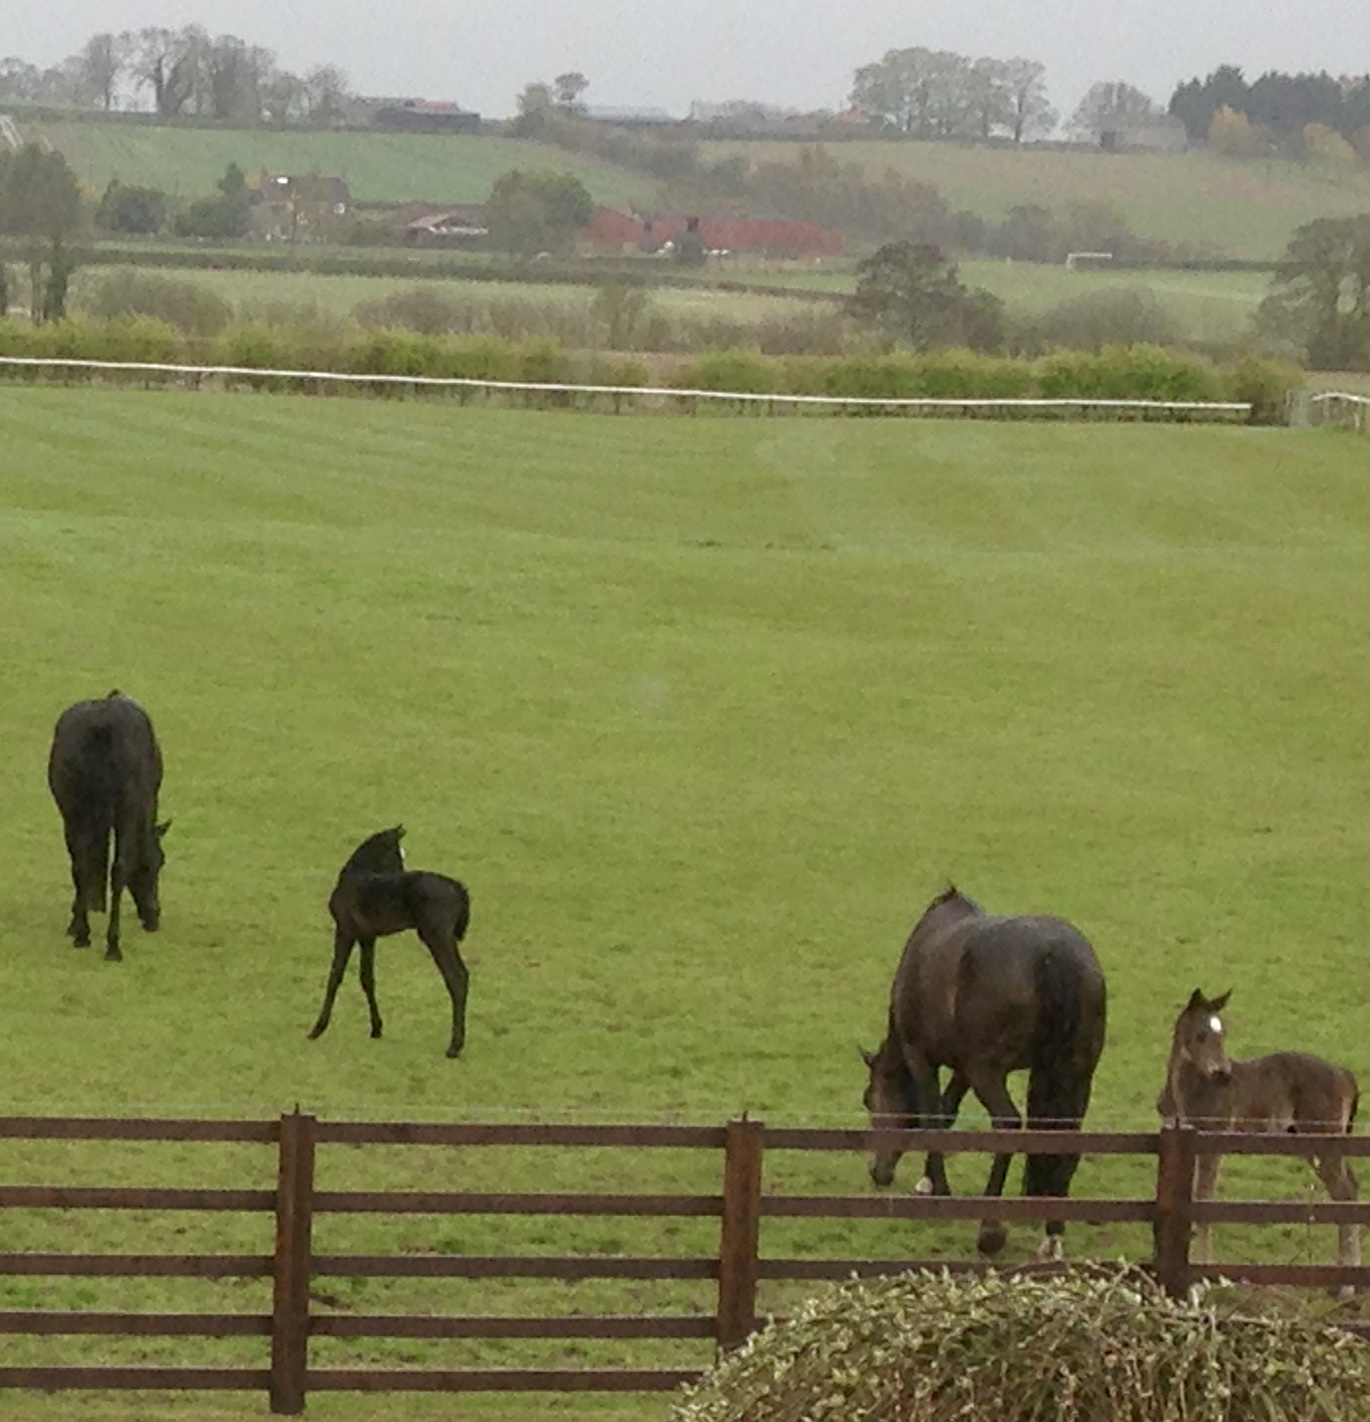 Mares and foals grazing at Thornton Lodge.